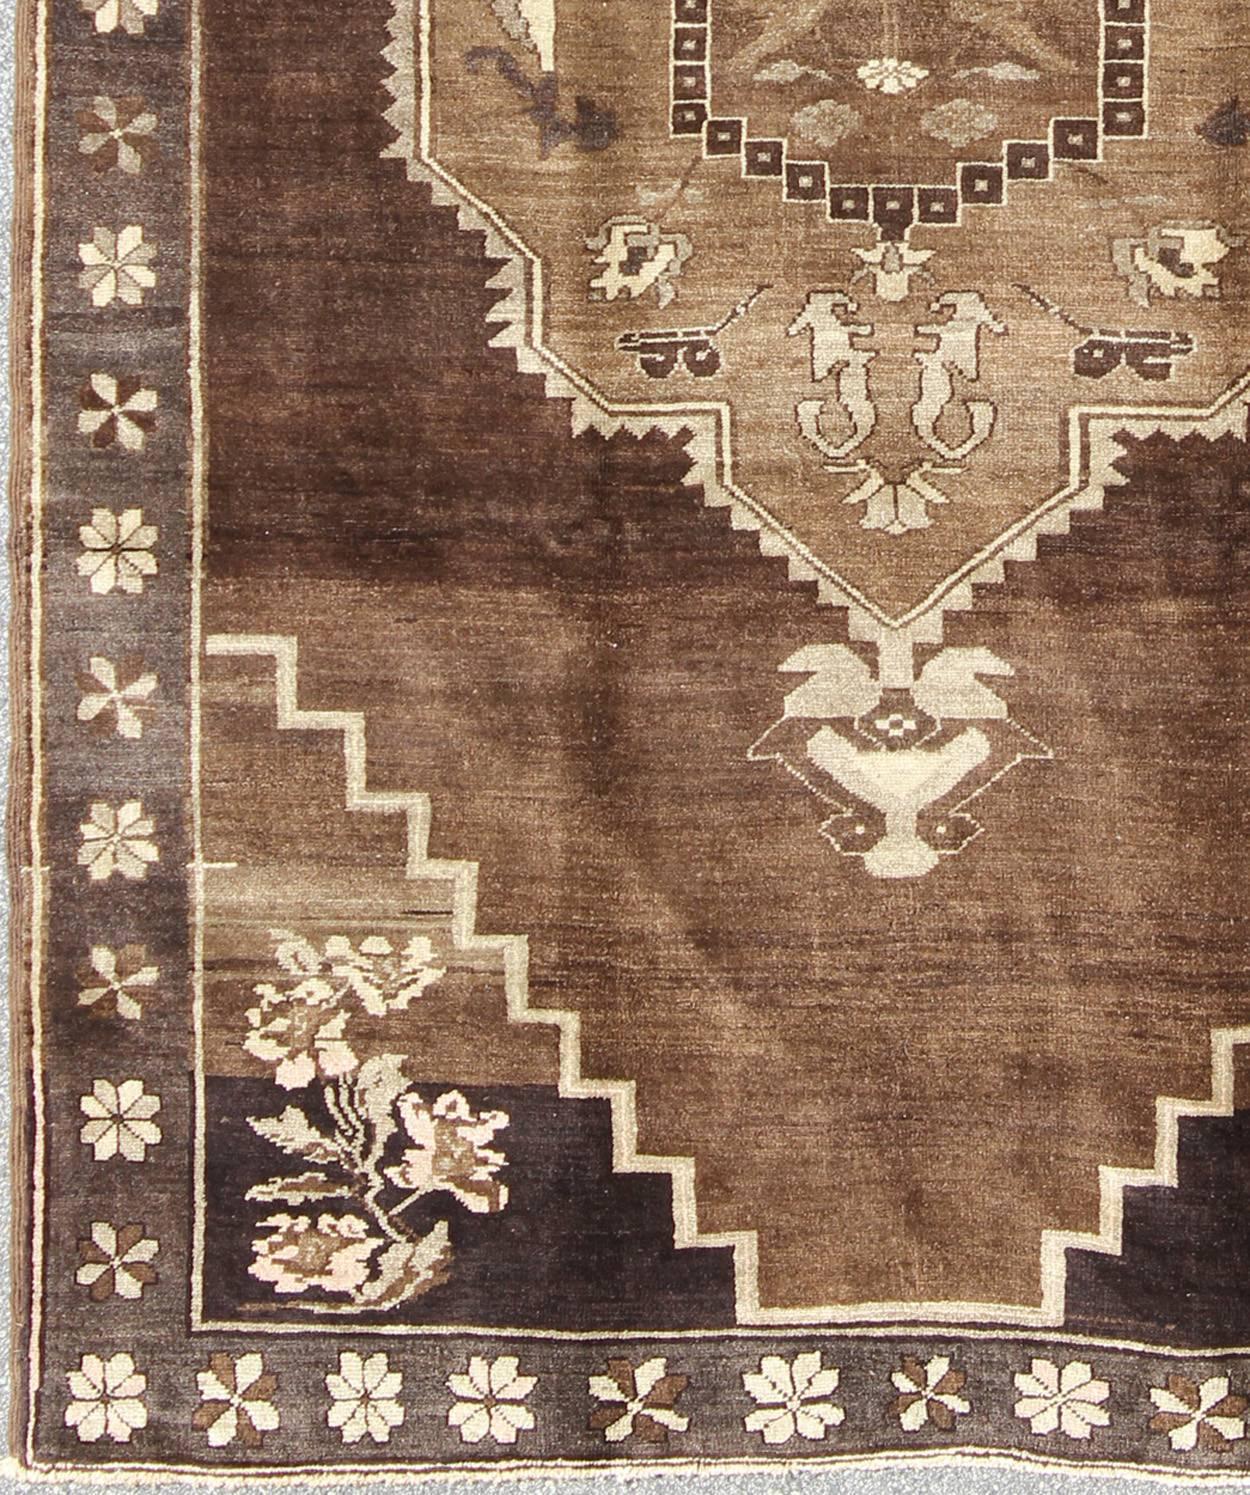 Vintage Brown Turkish Rug with Geometric Design in Various Brown Colors.
Set on a variation of light and dark brown and gray colors, the pale taupe and light blue colored roses are accented by light green leafs and vine designs. The border continues